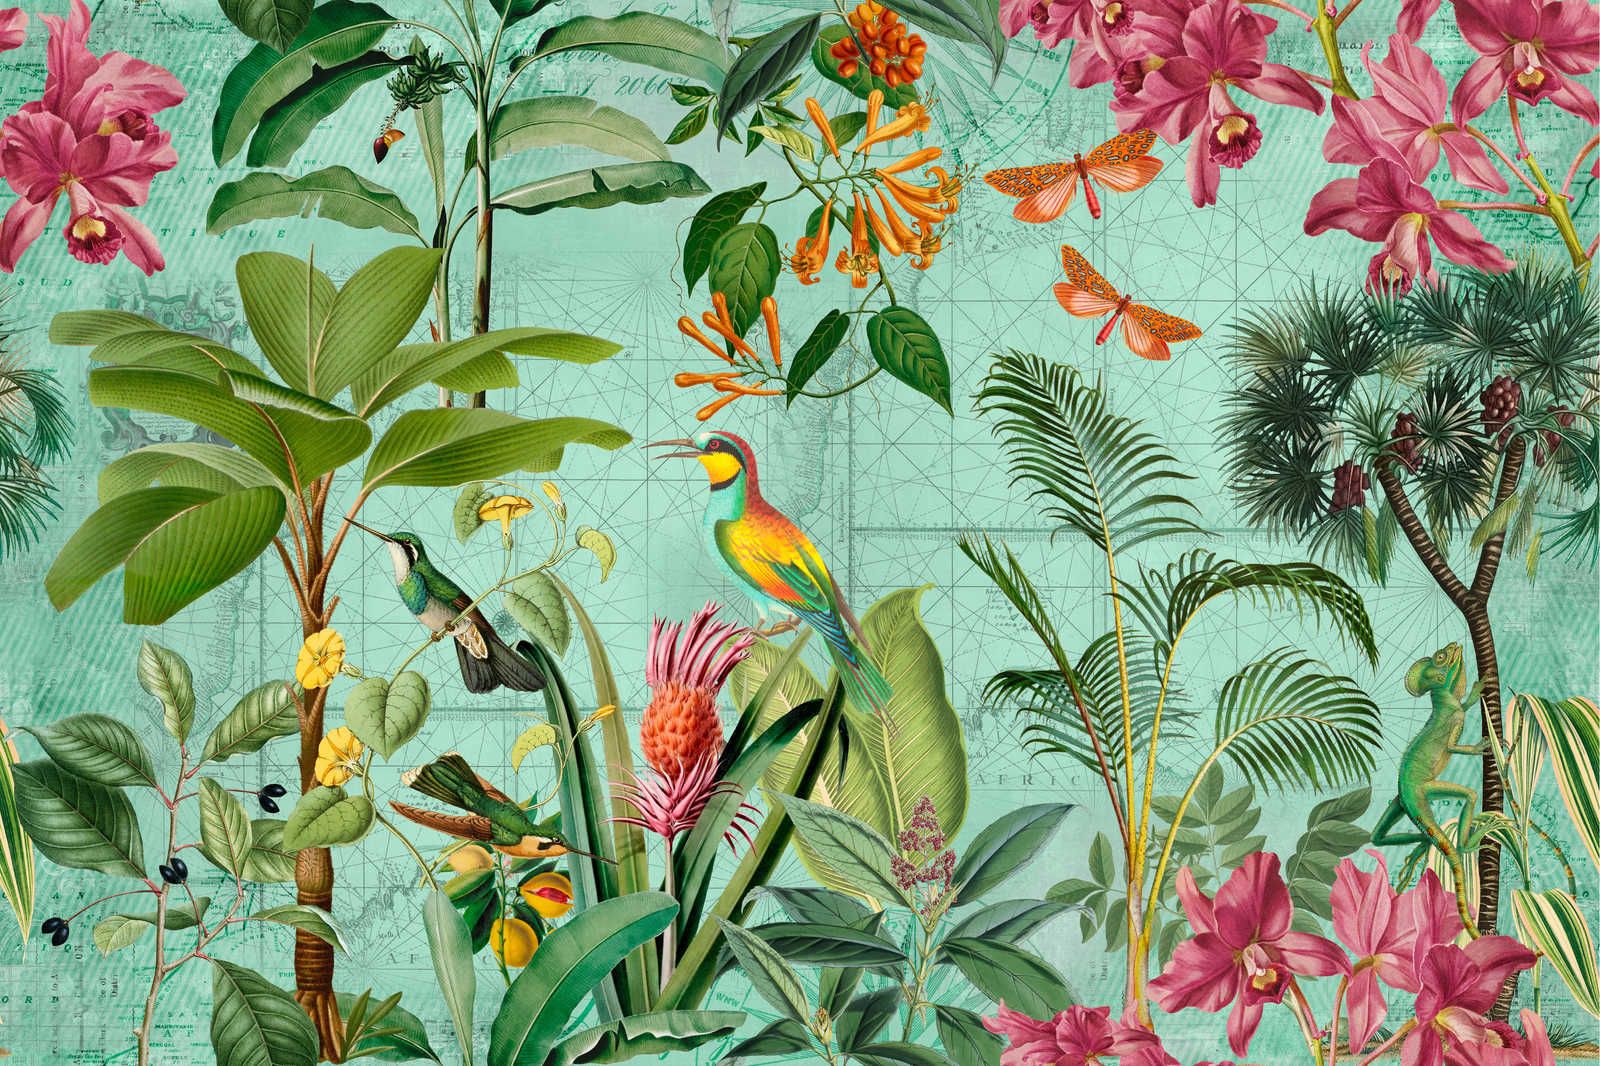             Colourful Jungle Canvas Painting with Trees, Flowers & Animals - 0.90 m x 0.60 m
        